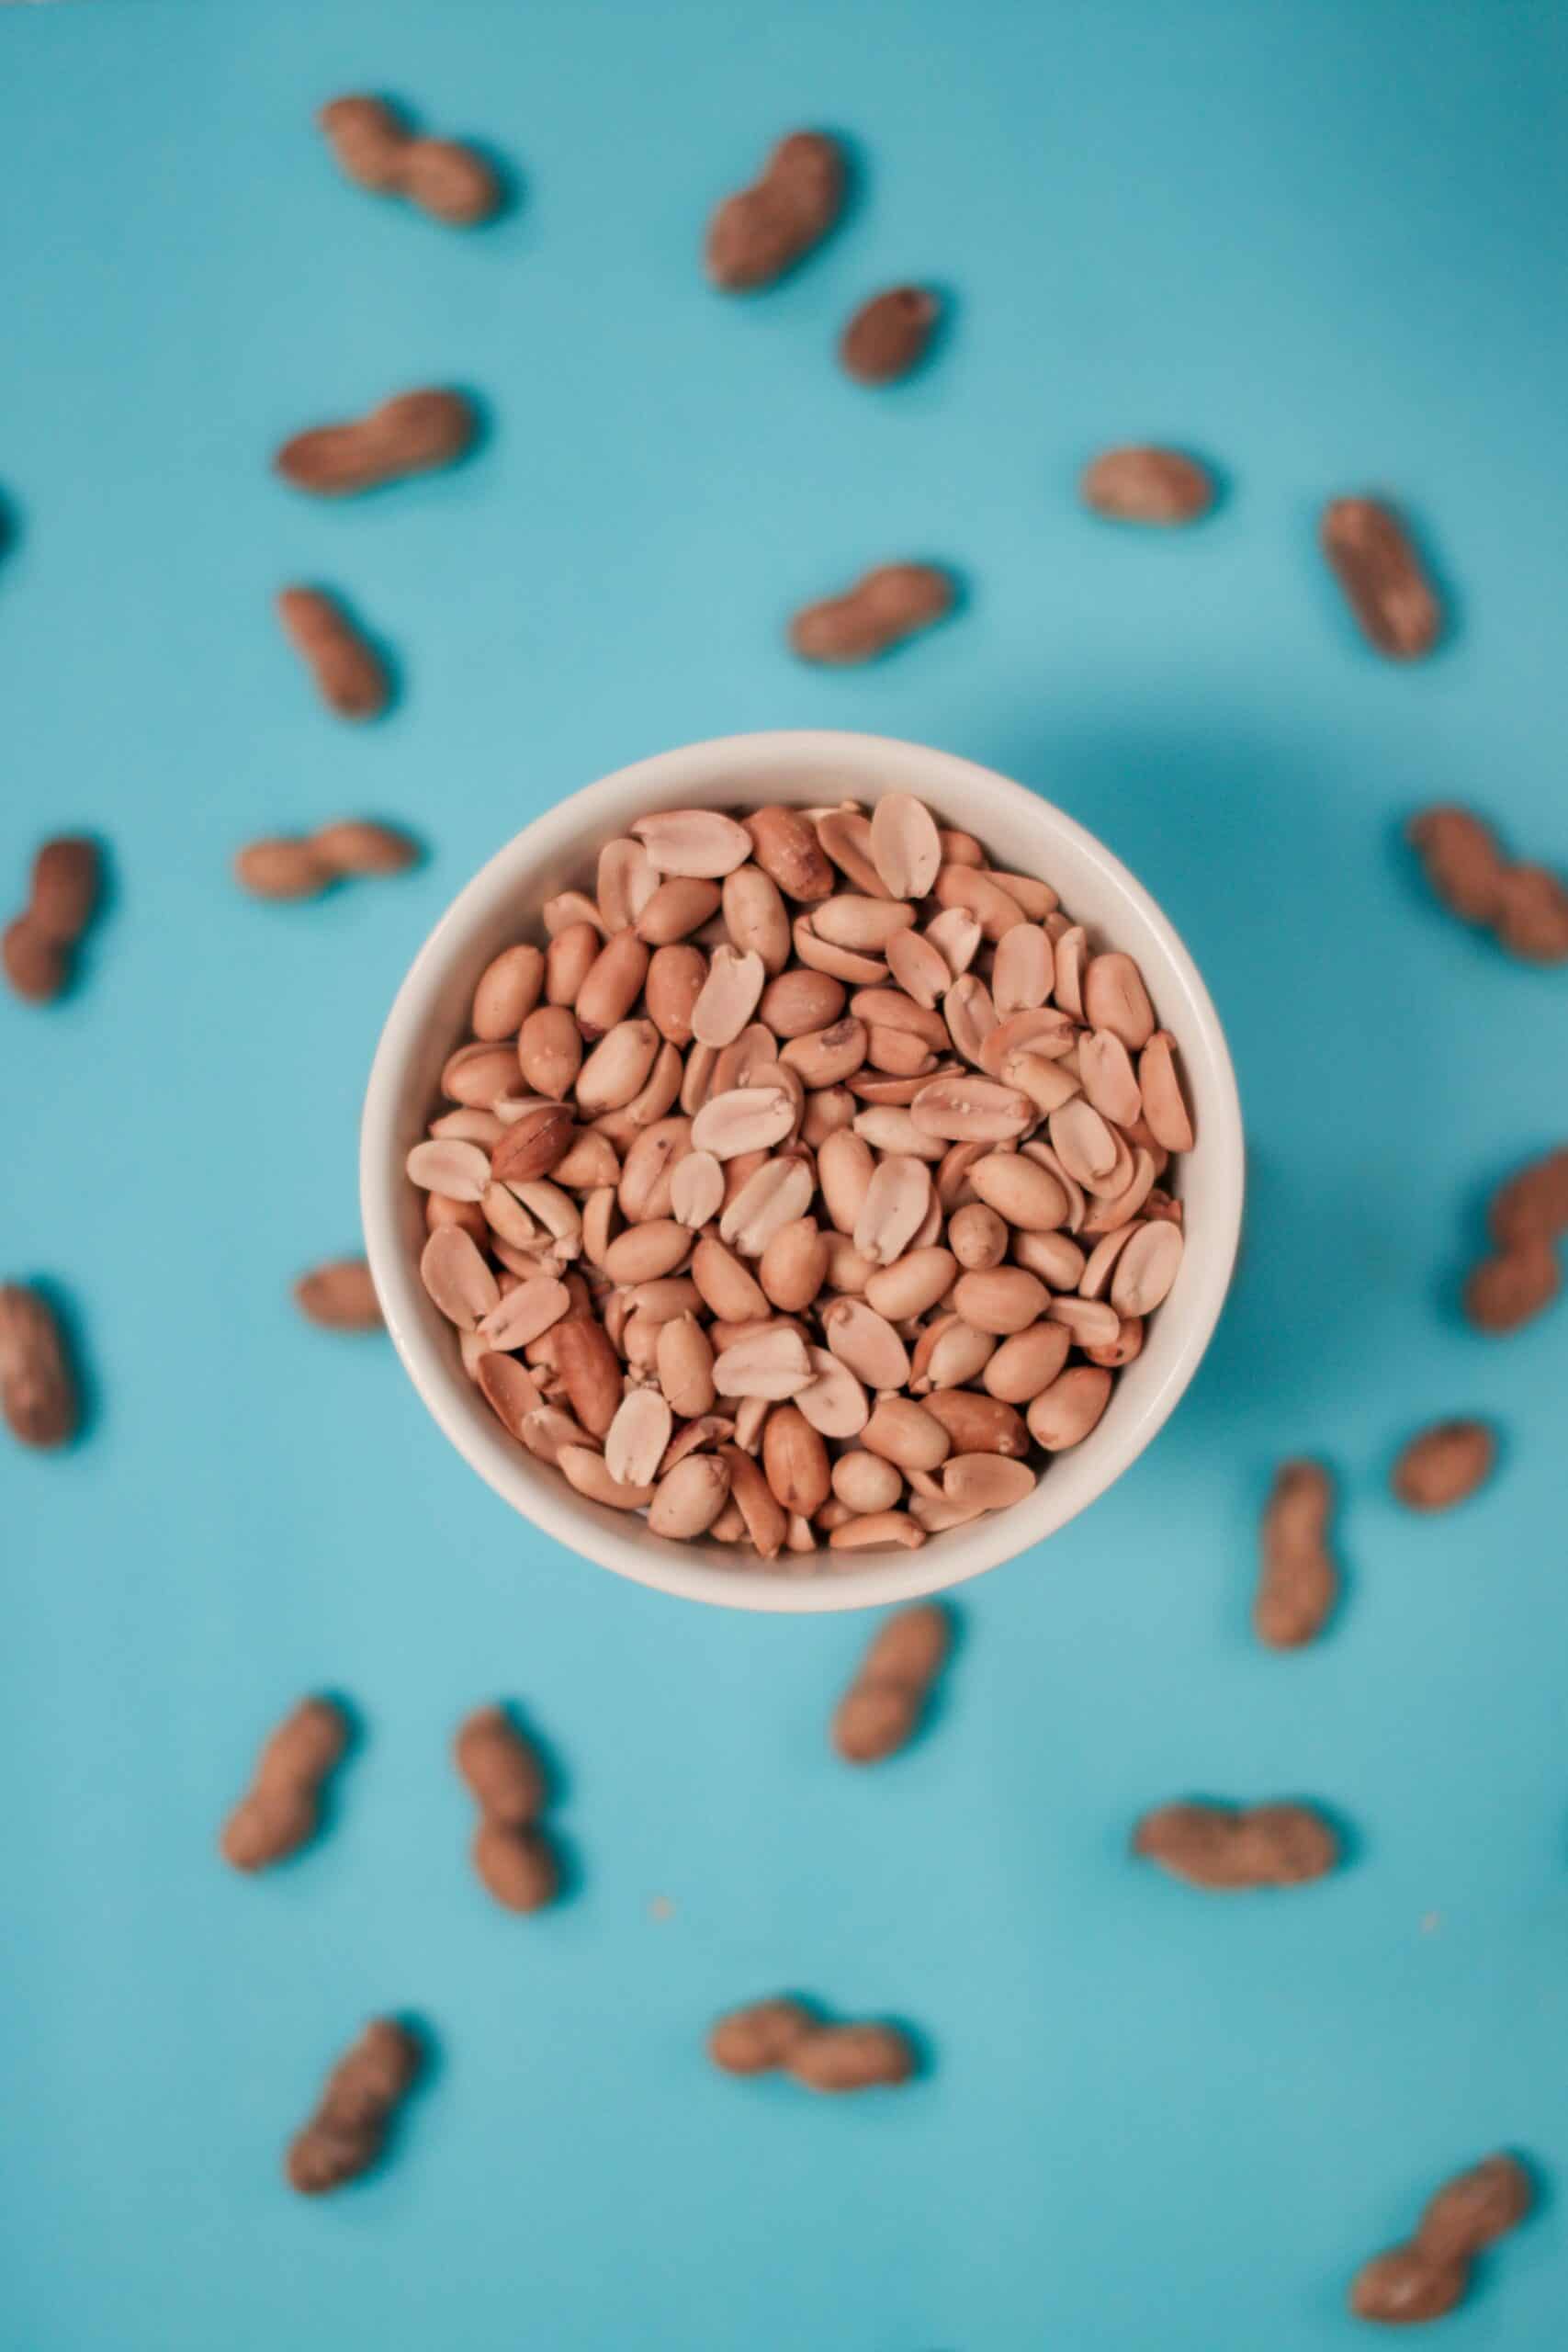 bowl of shelled peanuts surrounded by unshelled peanuts with a turquoise background